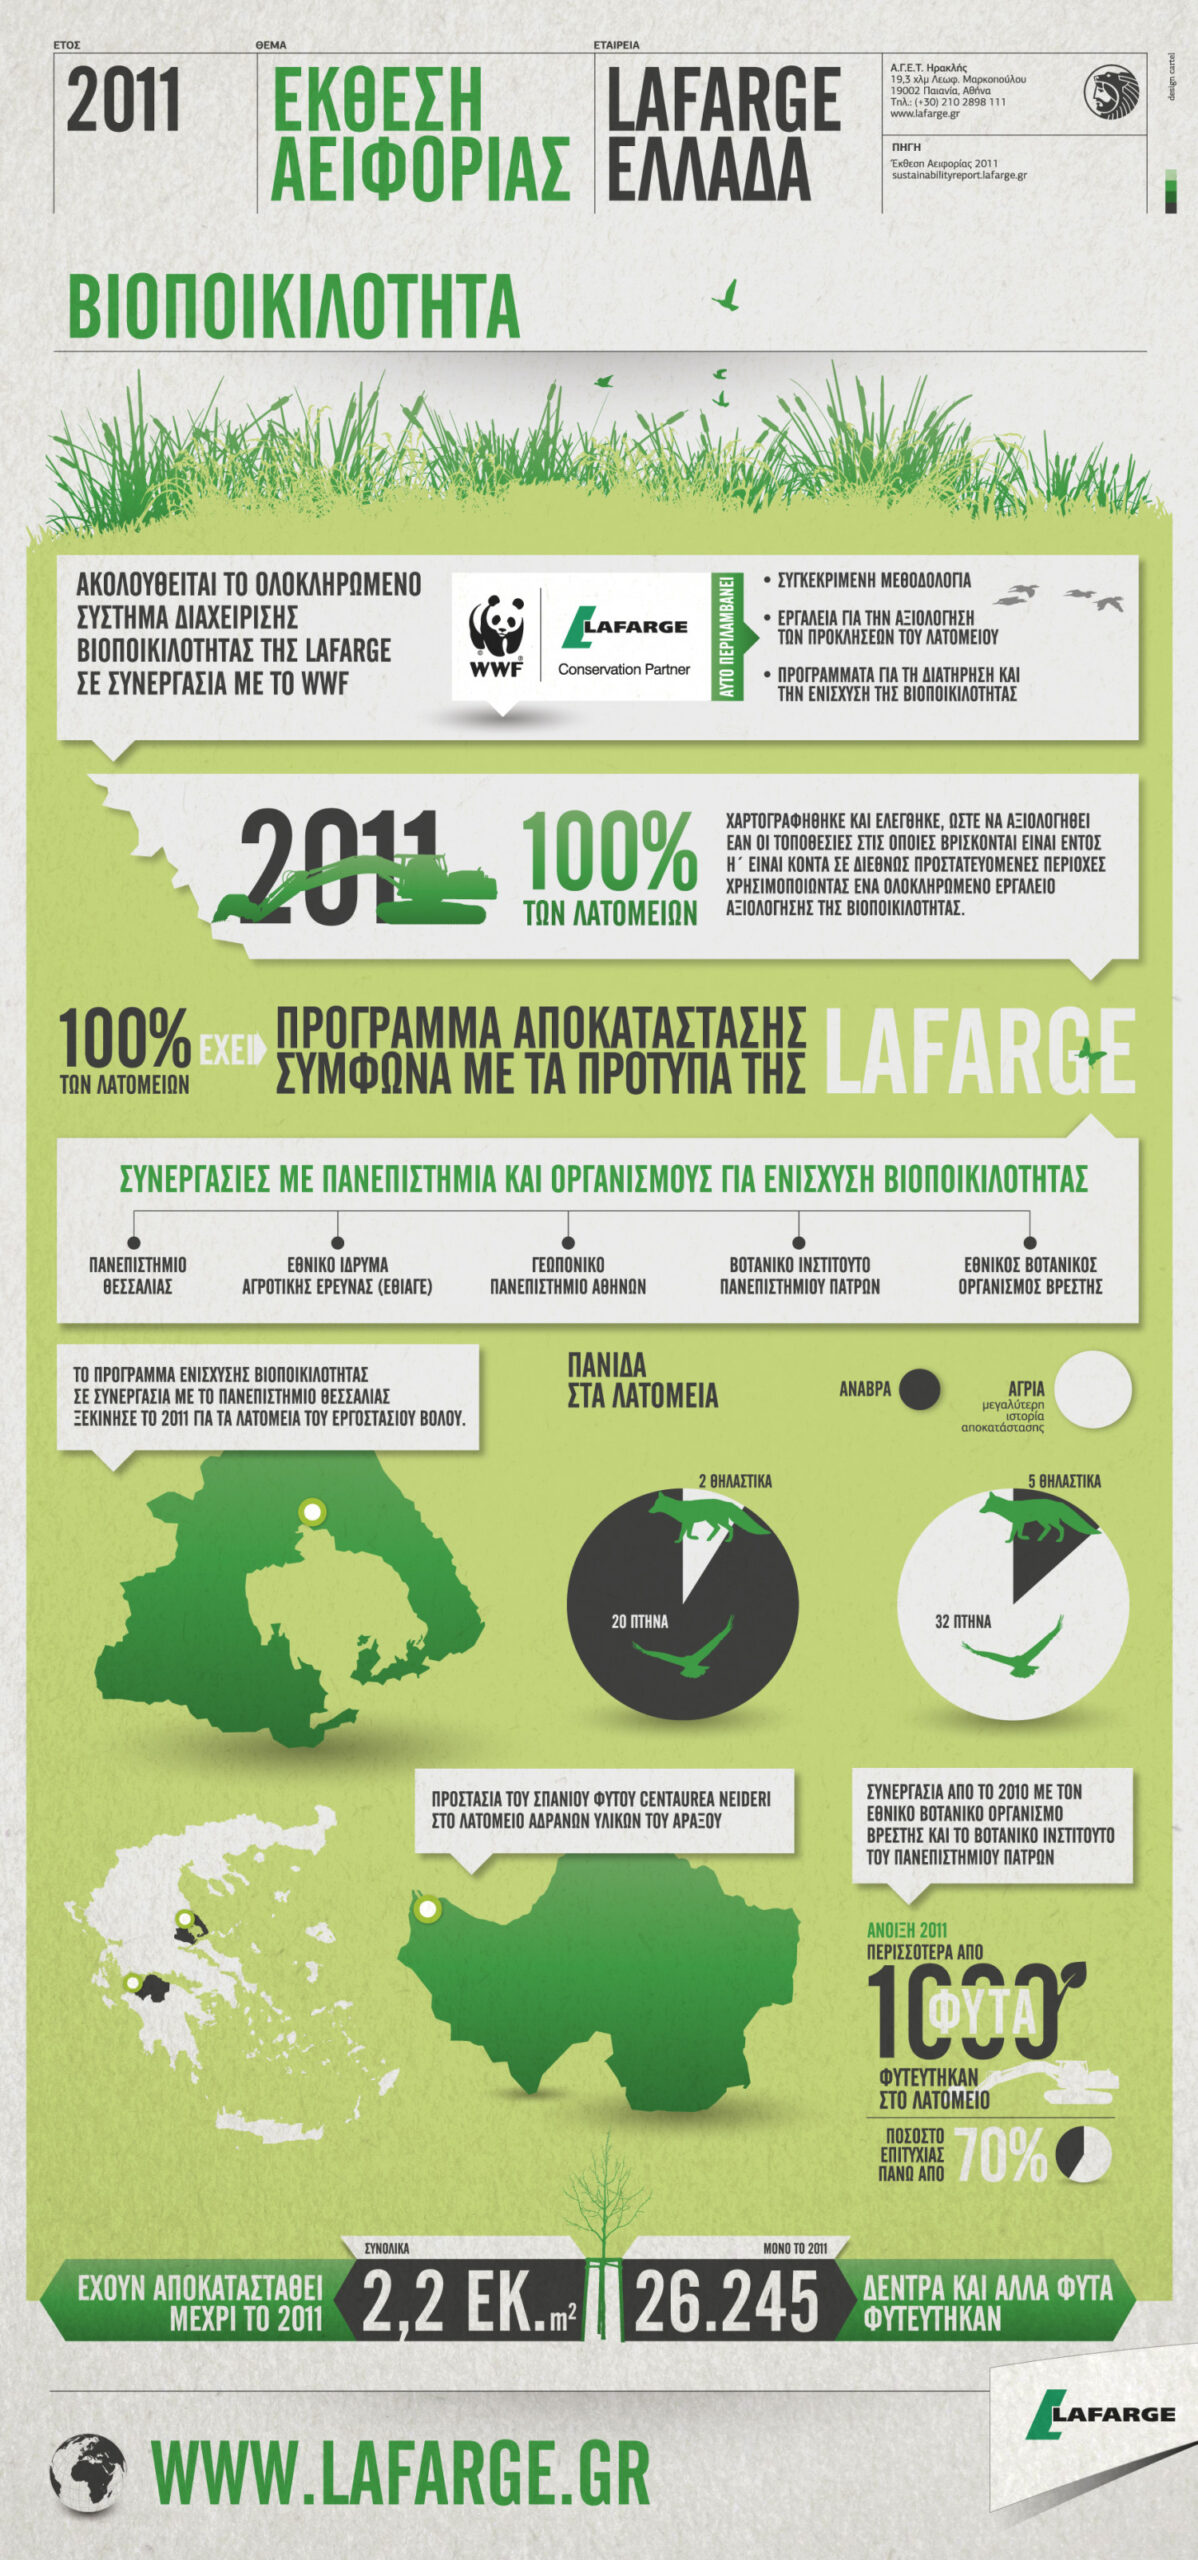 INFOGRAPHIC: Natural capital & biodiversity | Corporate Knights